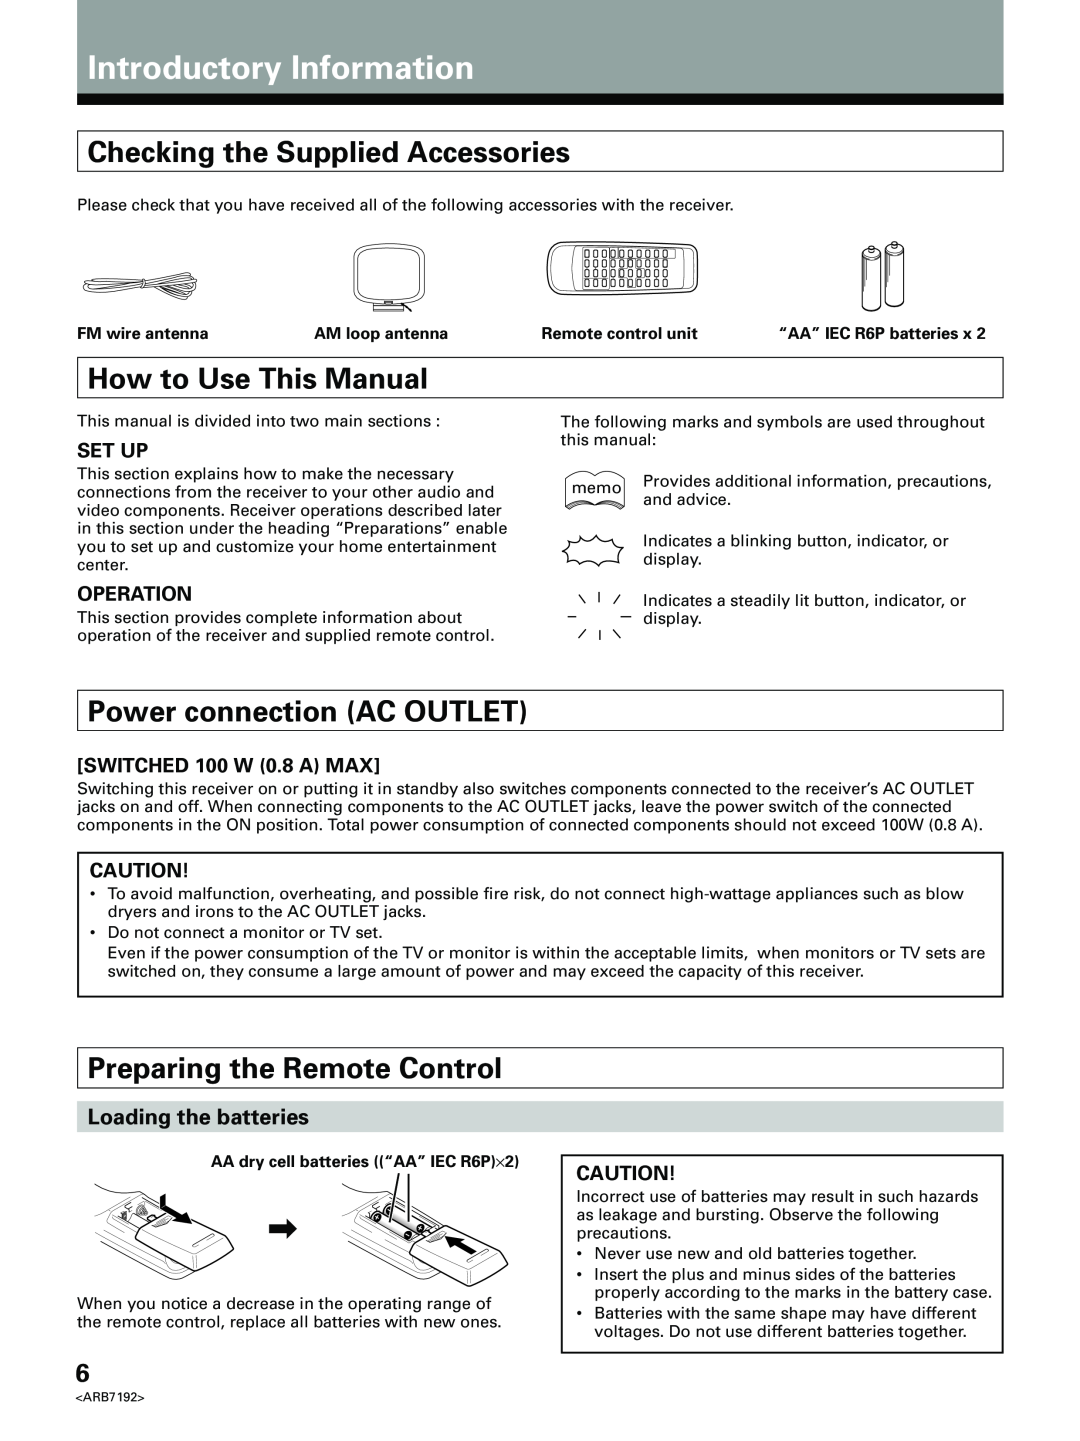 Pioneer VSX-D498 Introductory Information, Checking the Supplied Accessories, How to Use This Manual, Set Up, Operation 